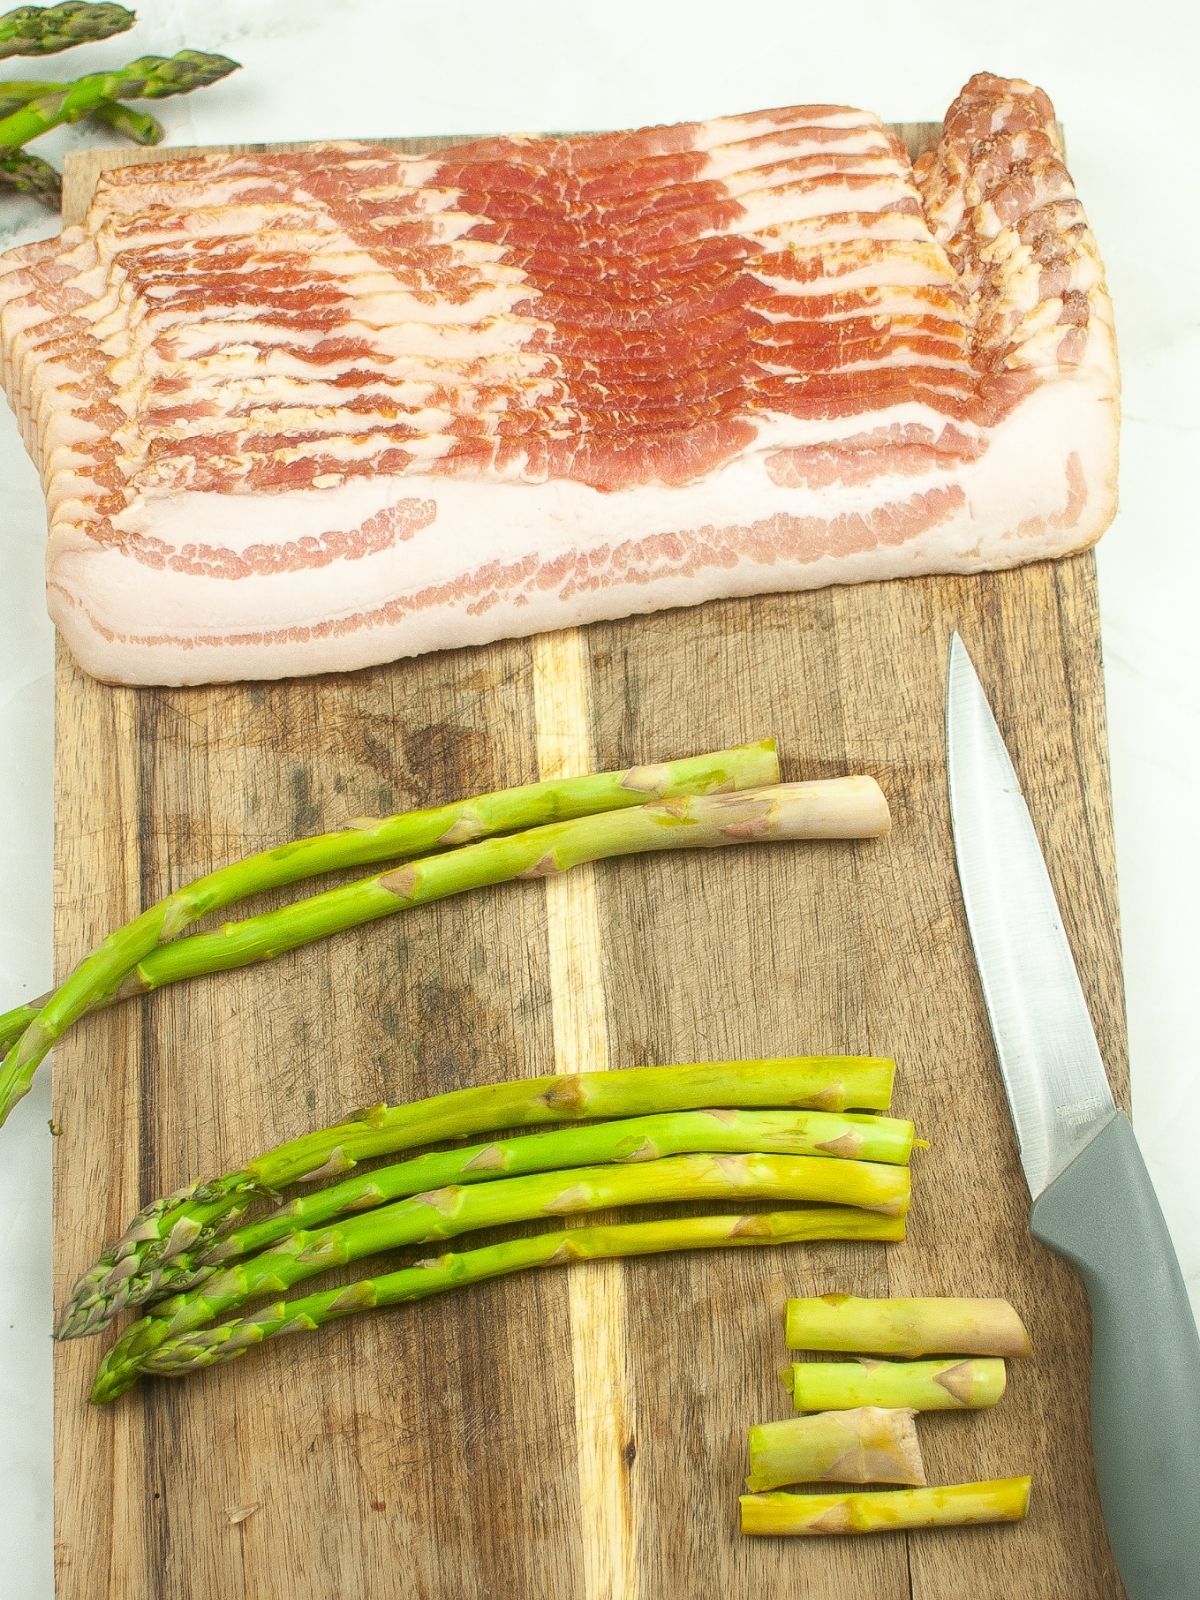 ends cut off of asparagus on cutting board with slices of bacon.